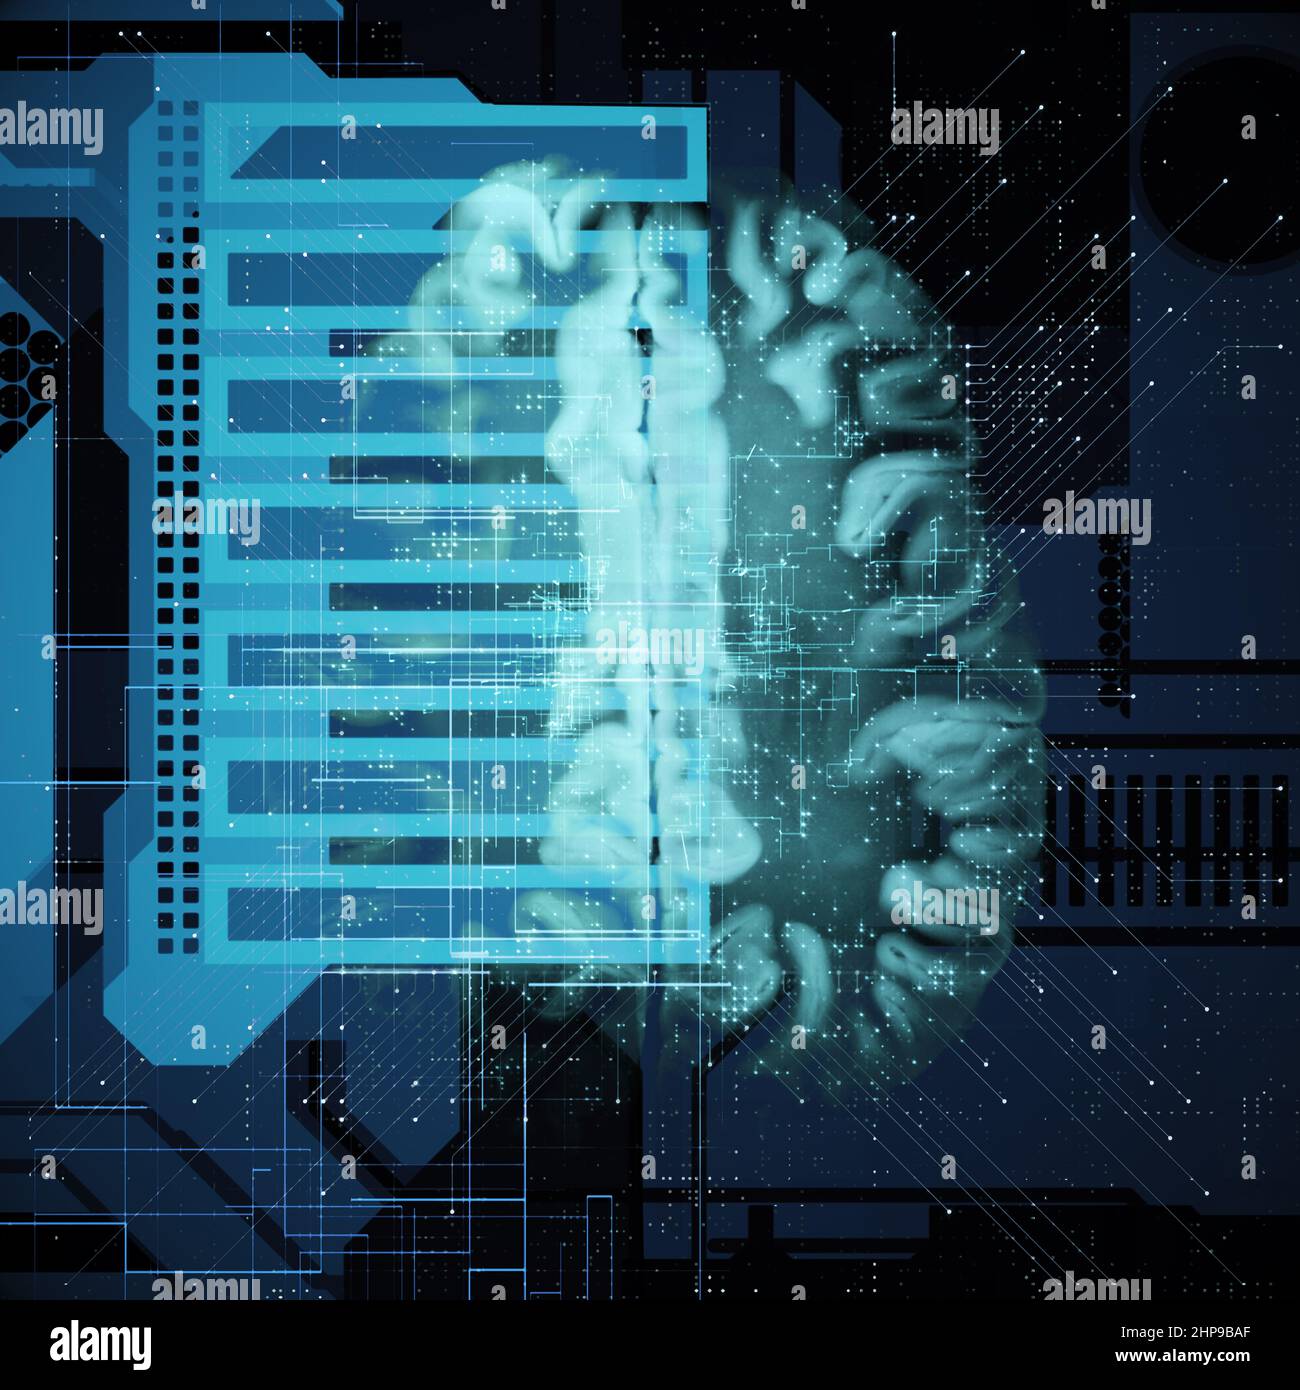 Brain Cross Section On Central Processing Unit, Cyber Neural Networks, Neurolink, Artificial Intelligence, Cpu, Big Data, Internet Networks Stock Photo